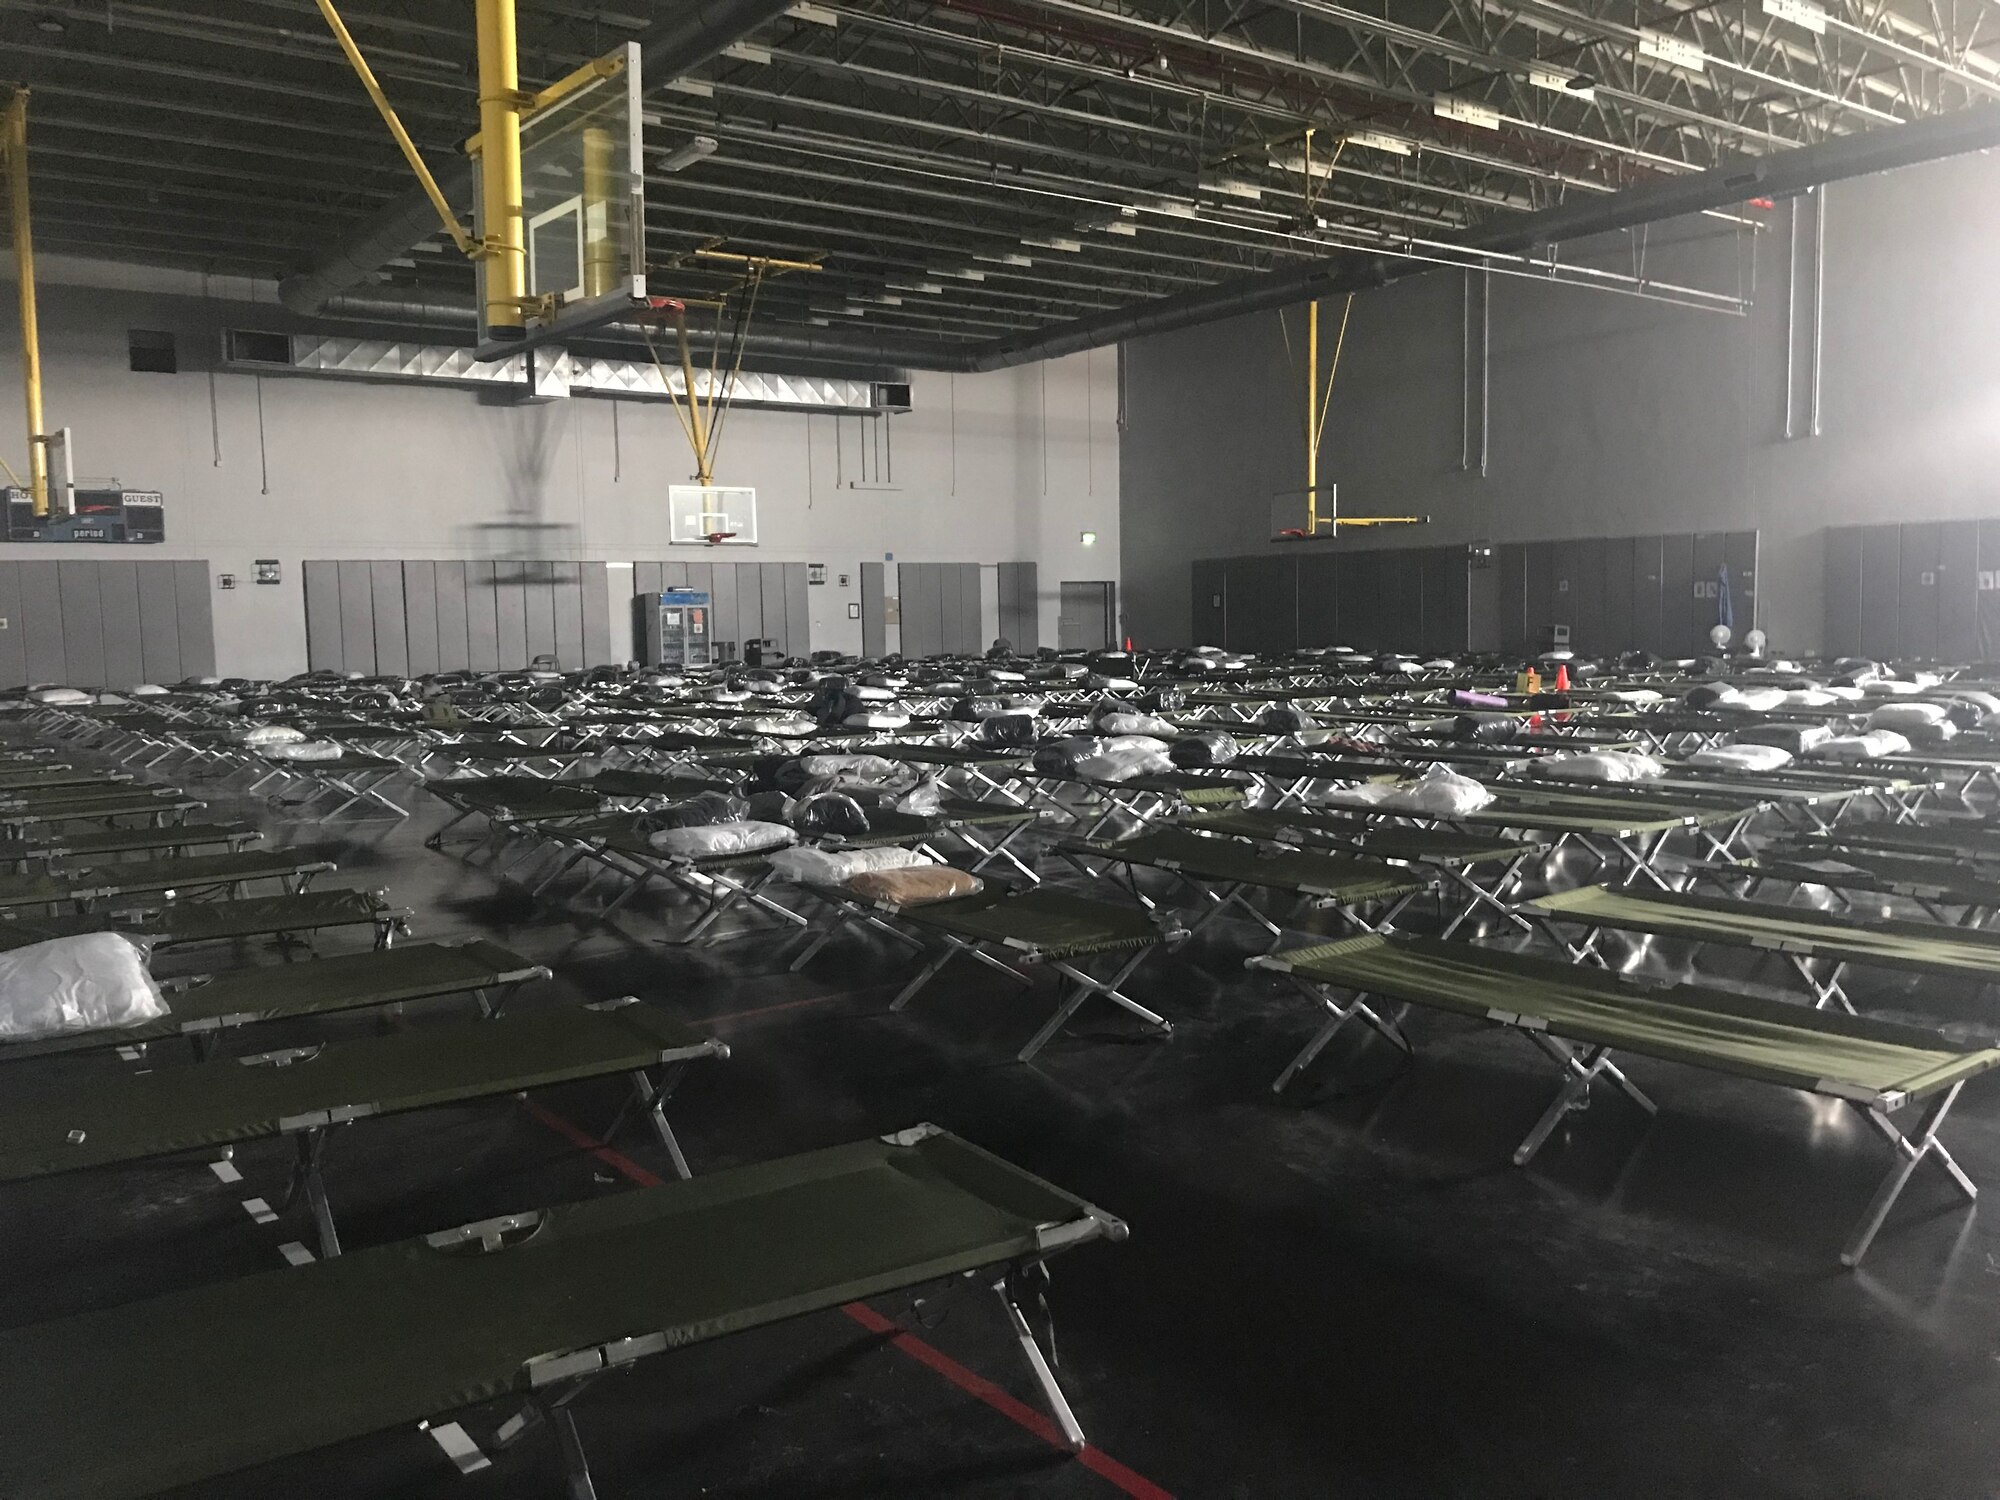 Cots are spread out on a basketball court at one of the gyms at Al Udeid Air Base, Qatar.